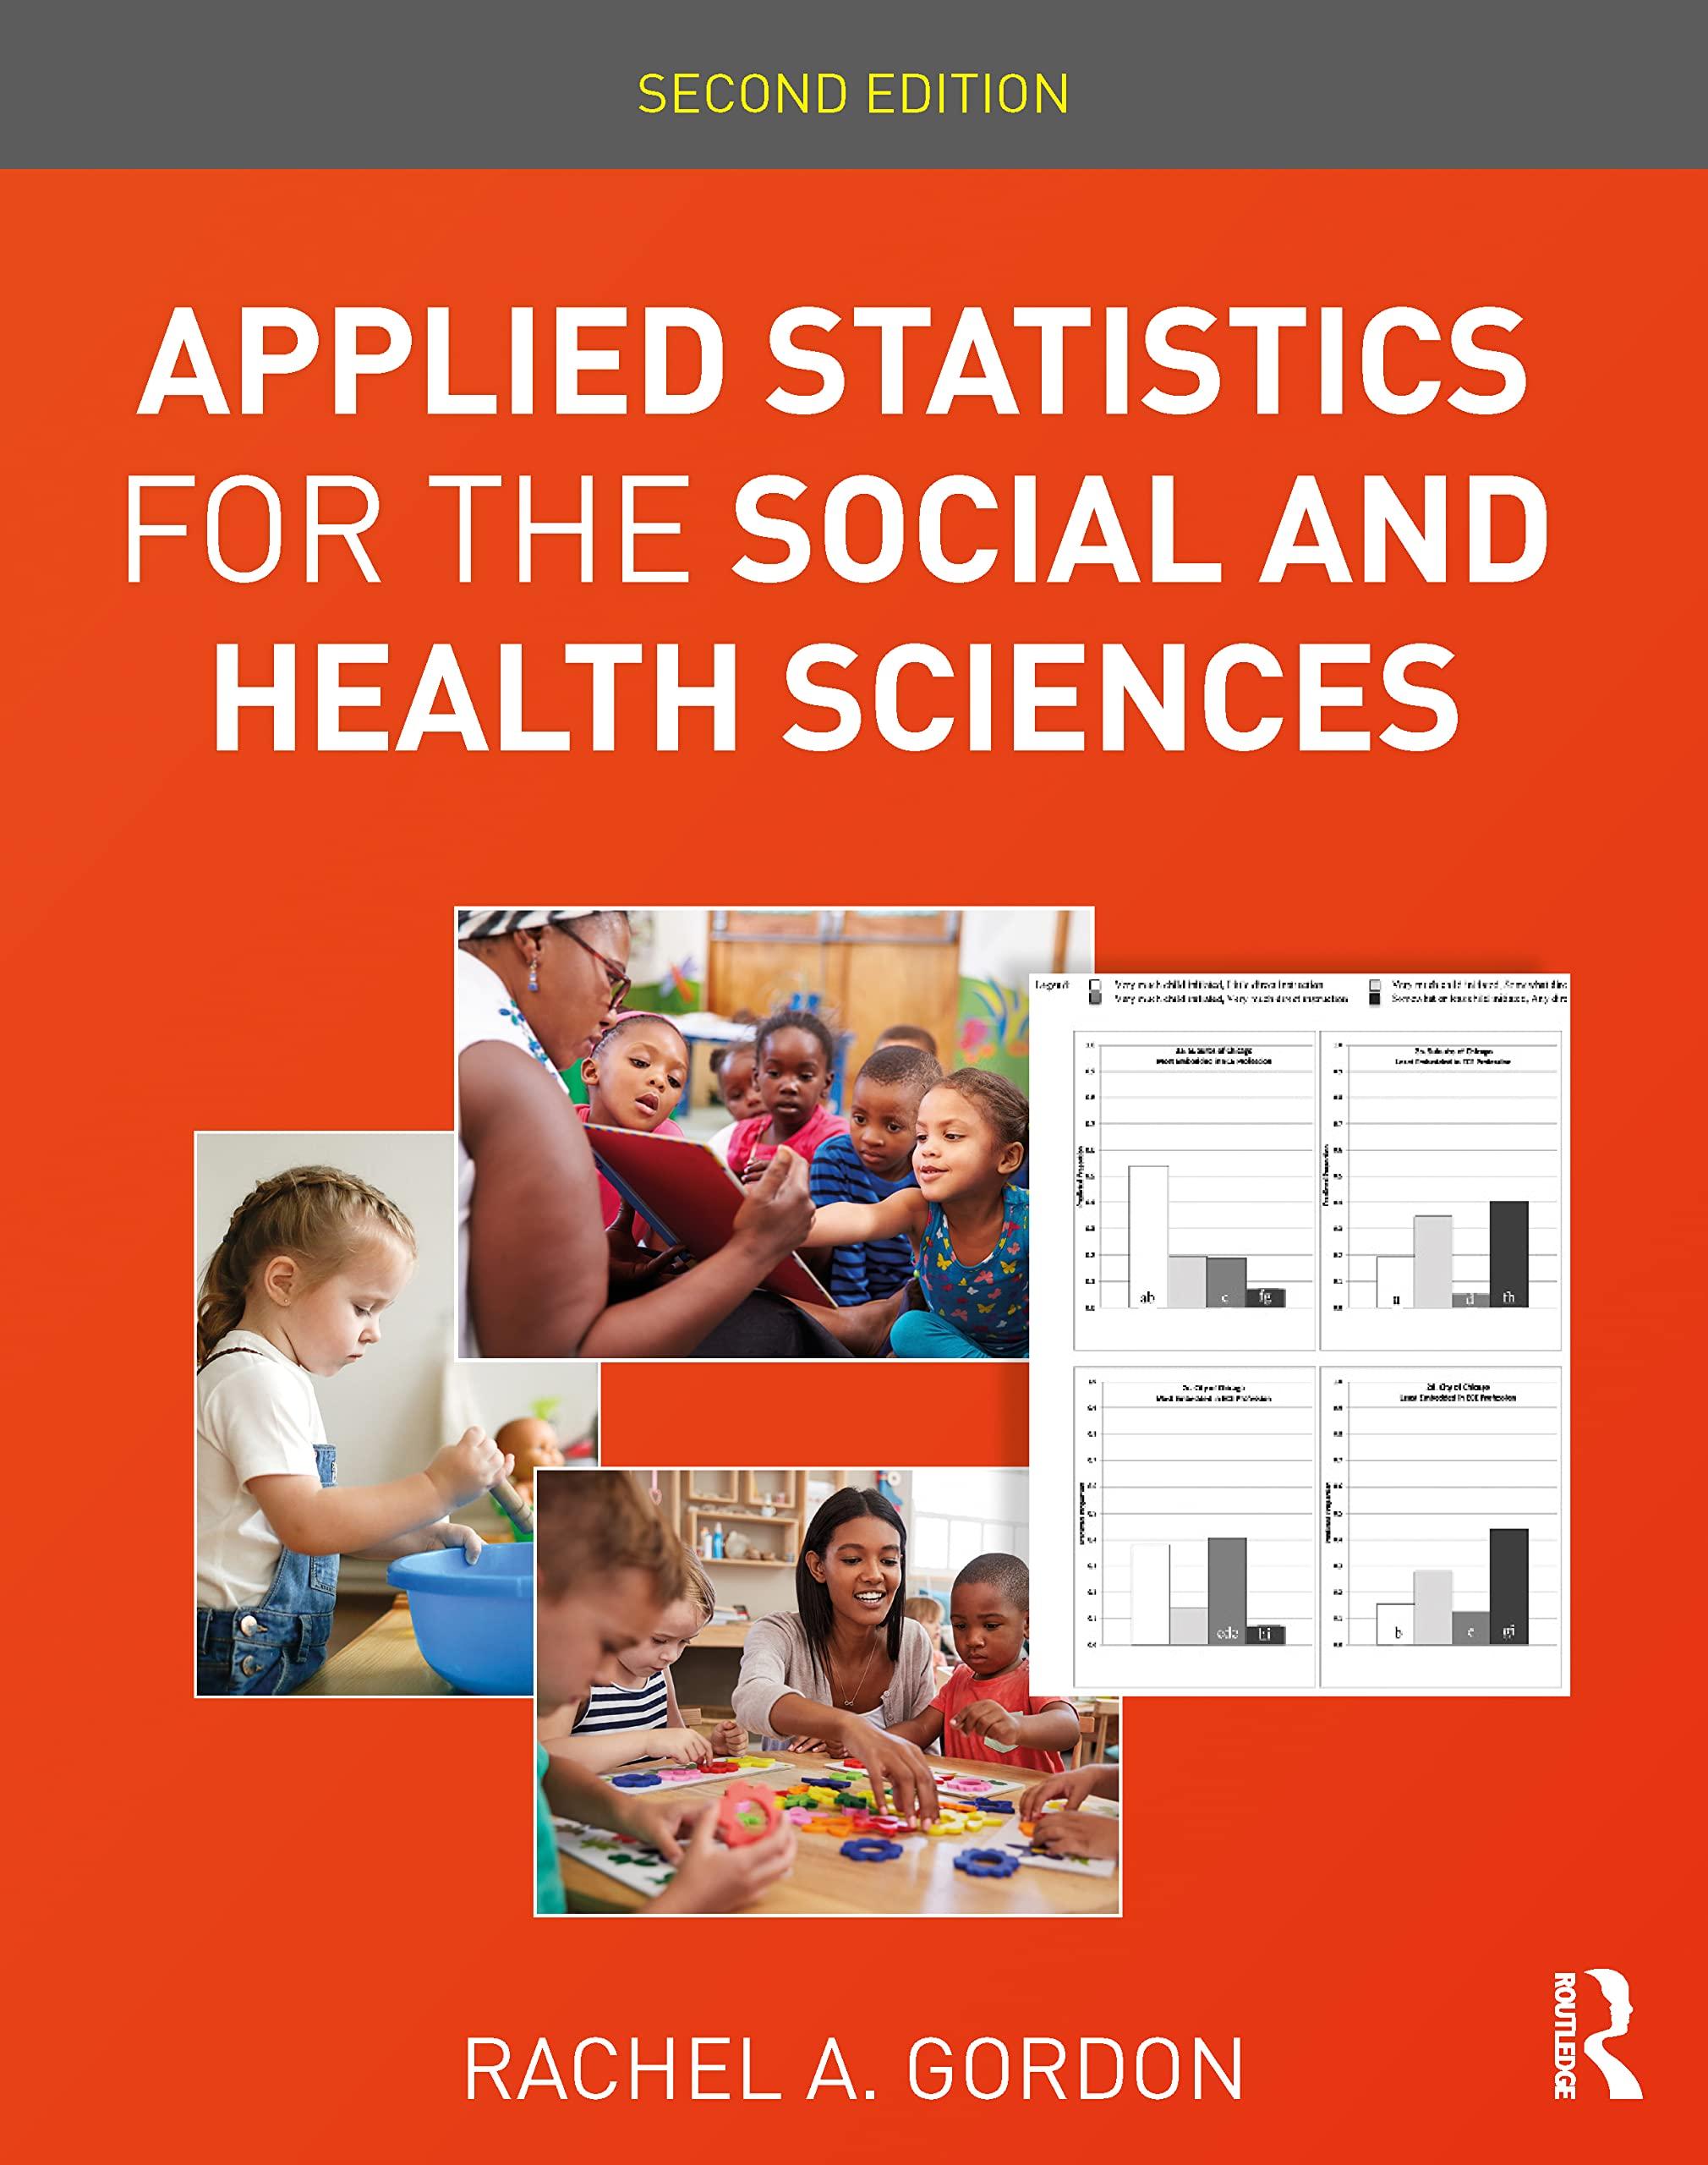 applied statistics for the social and health sciences 2nd edition rachel a. gordon 1032323442, 9781032323442